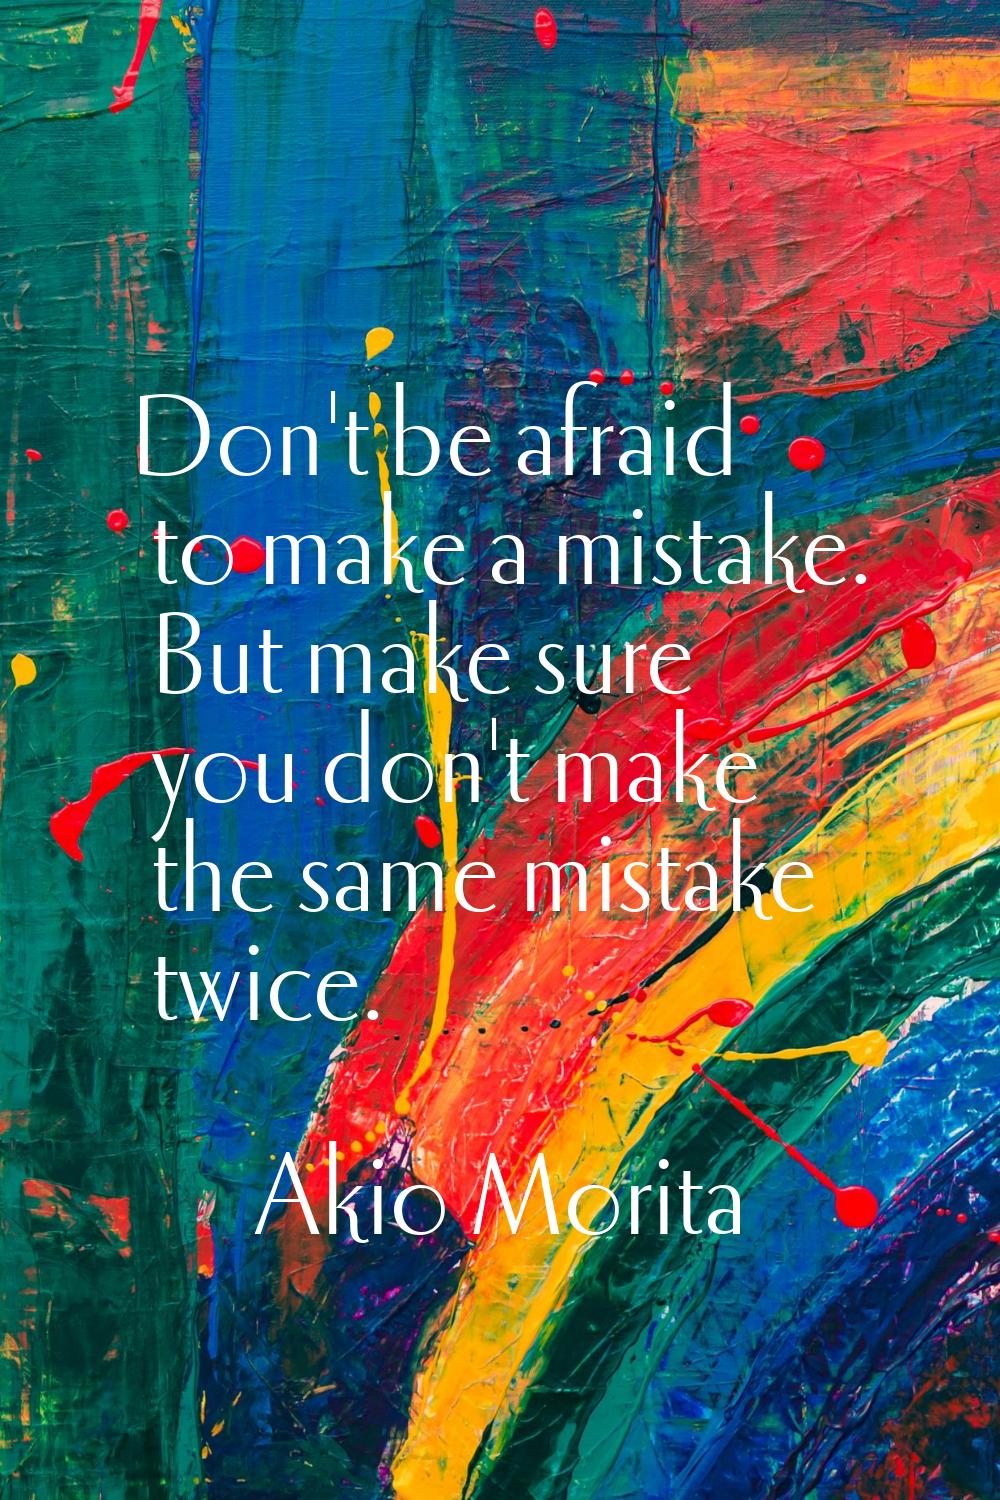 Don't be afraid to make a mistake. But make sure you don't make the same mistake twice.